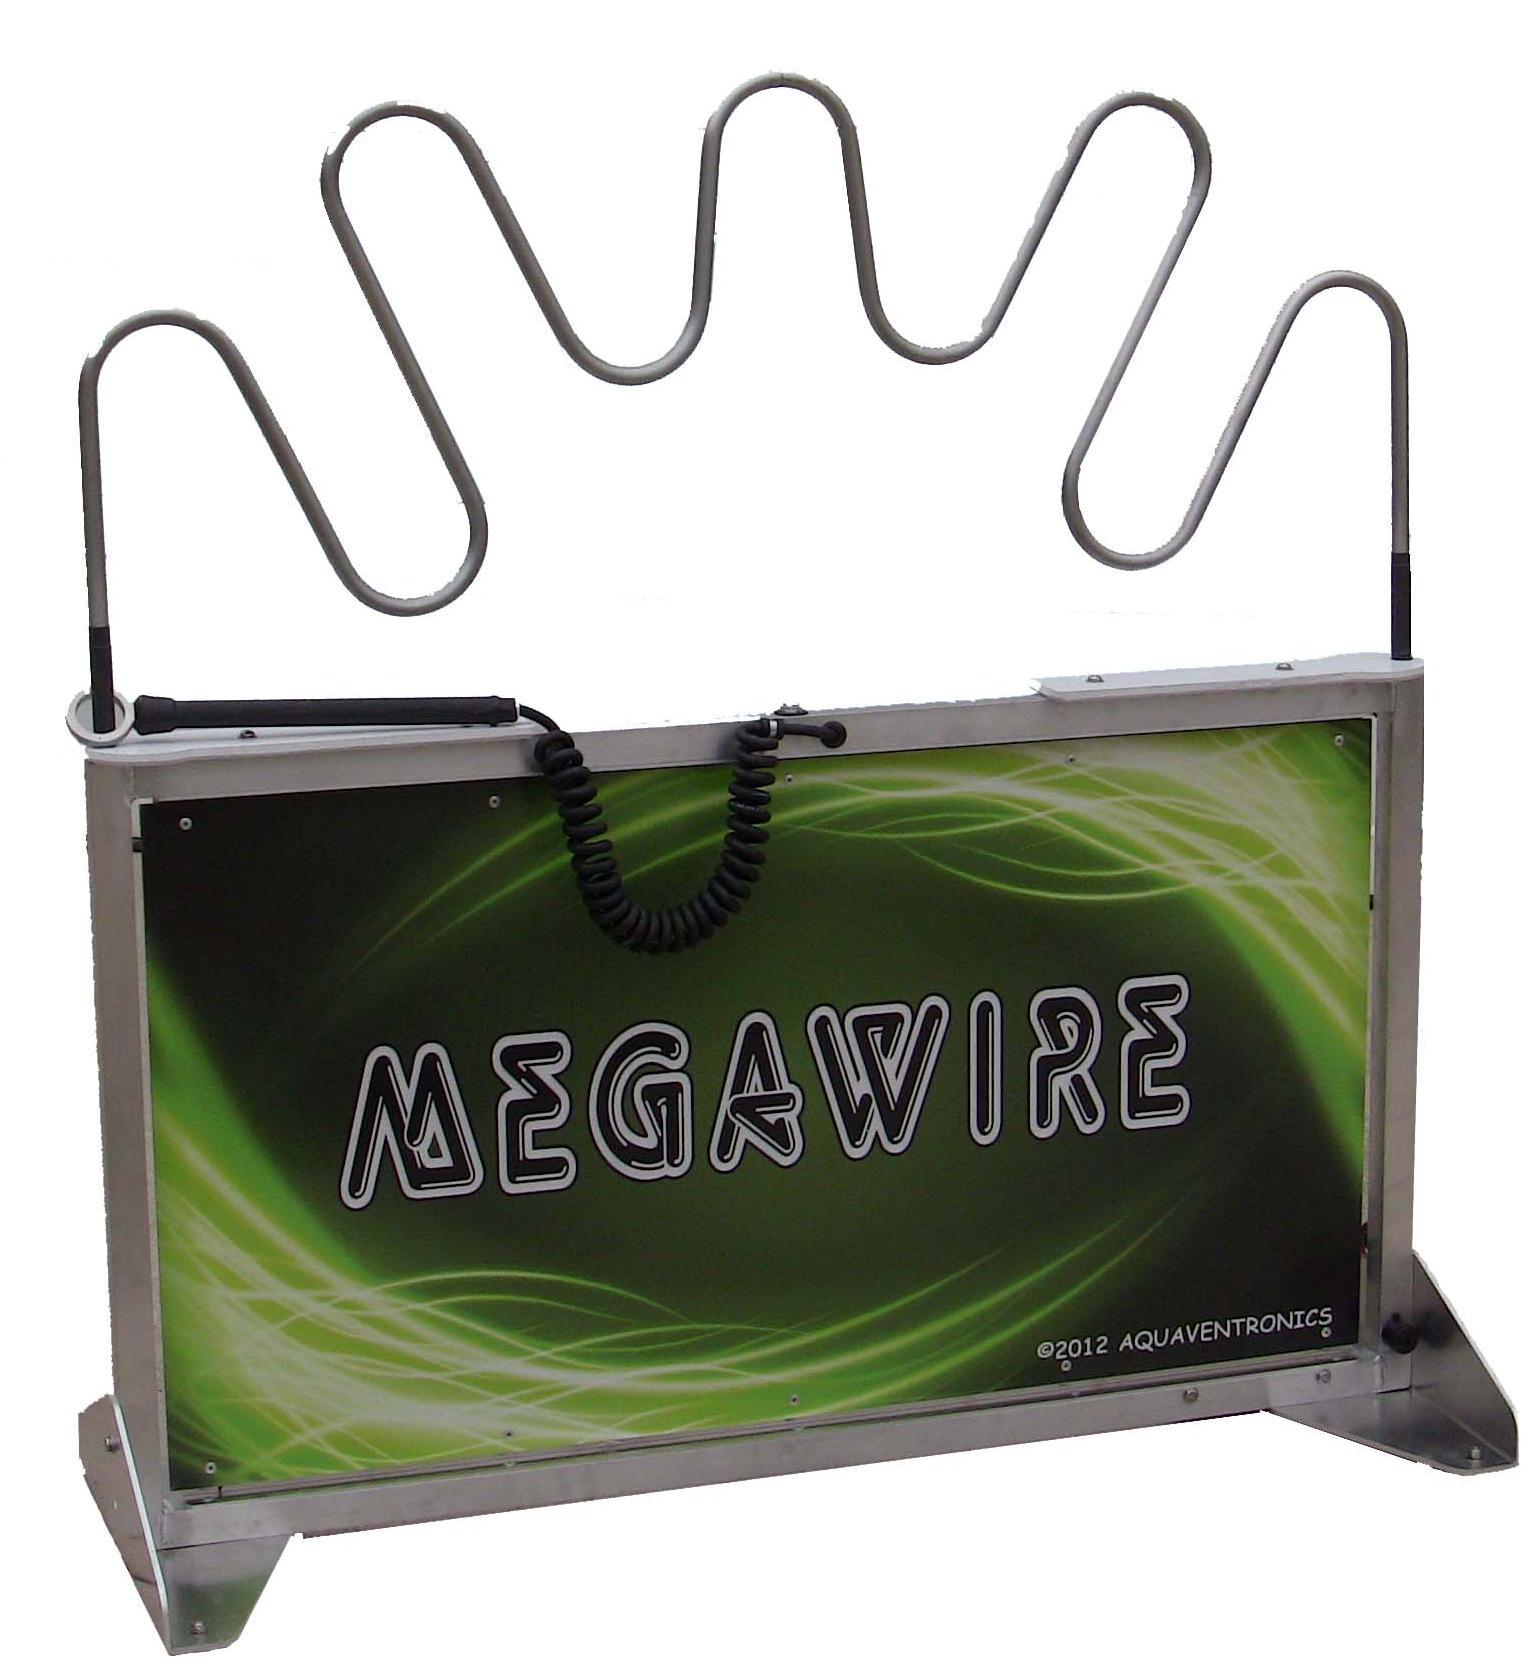 megawire electric arcade game